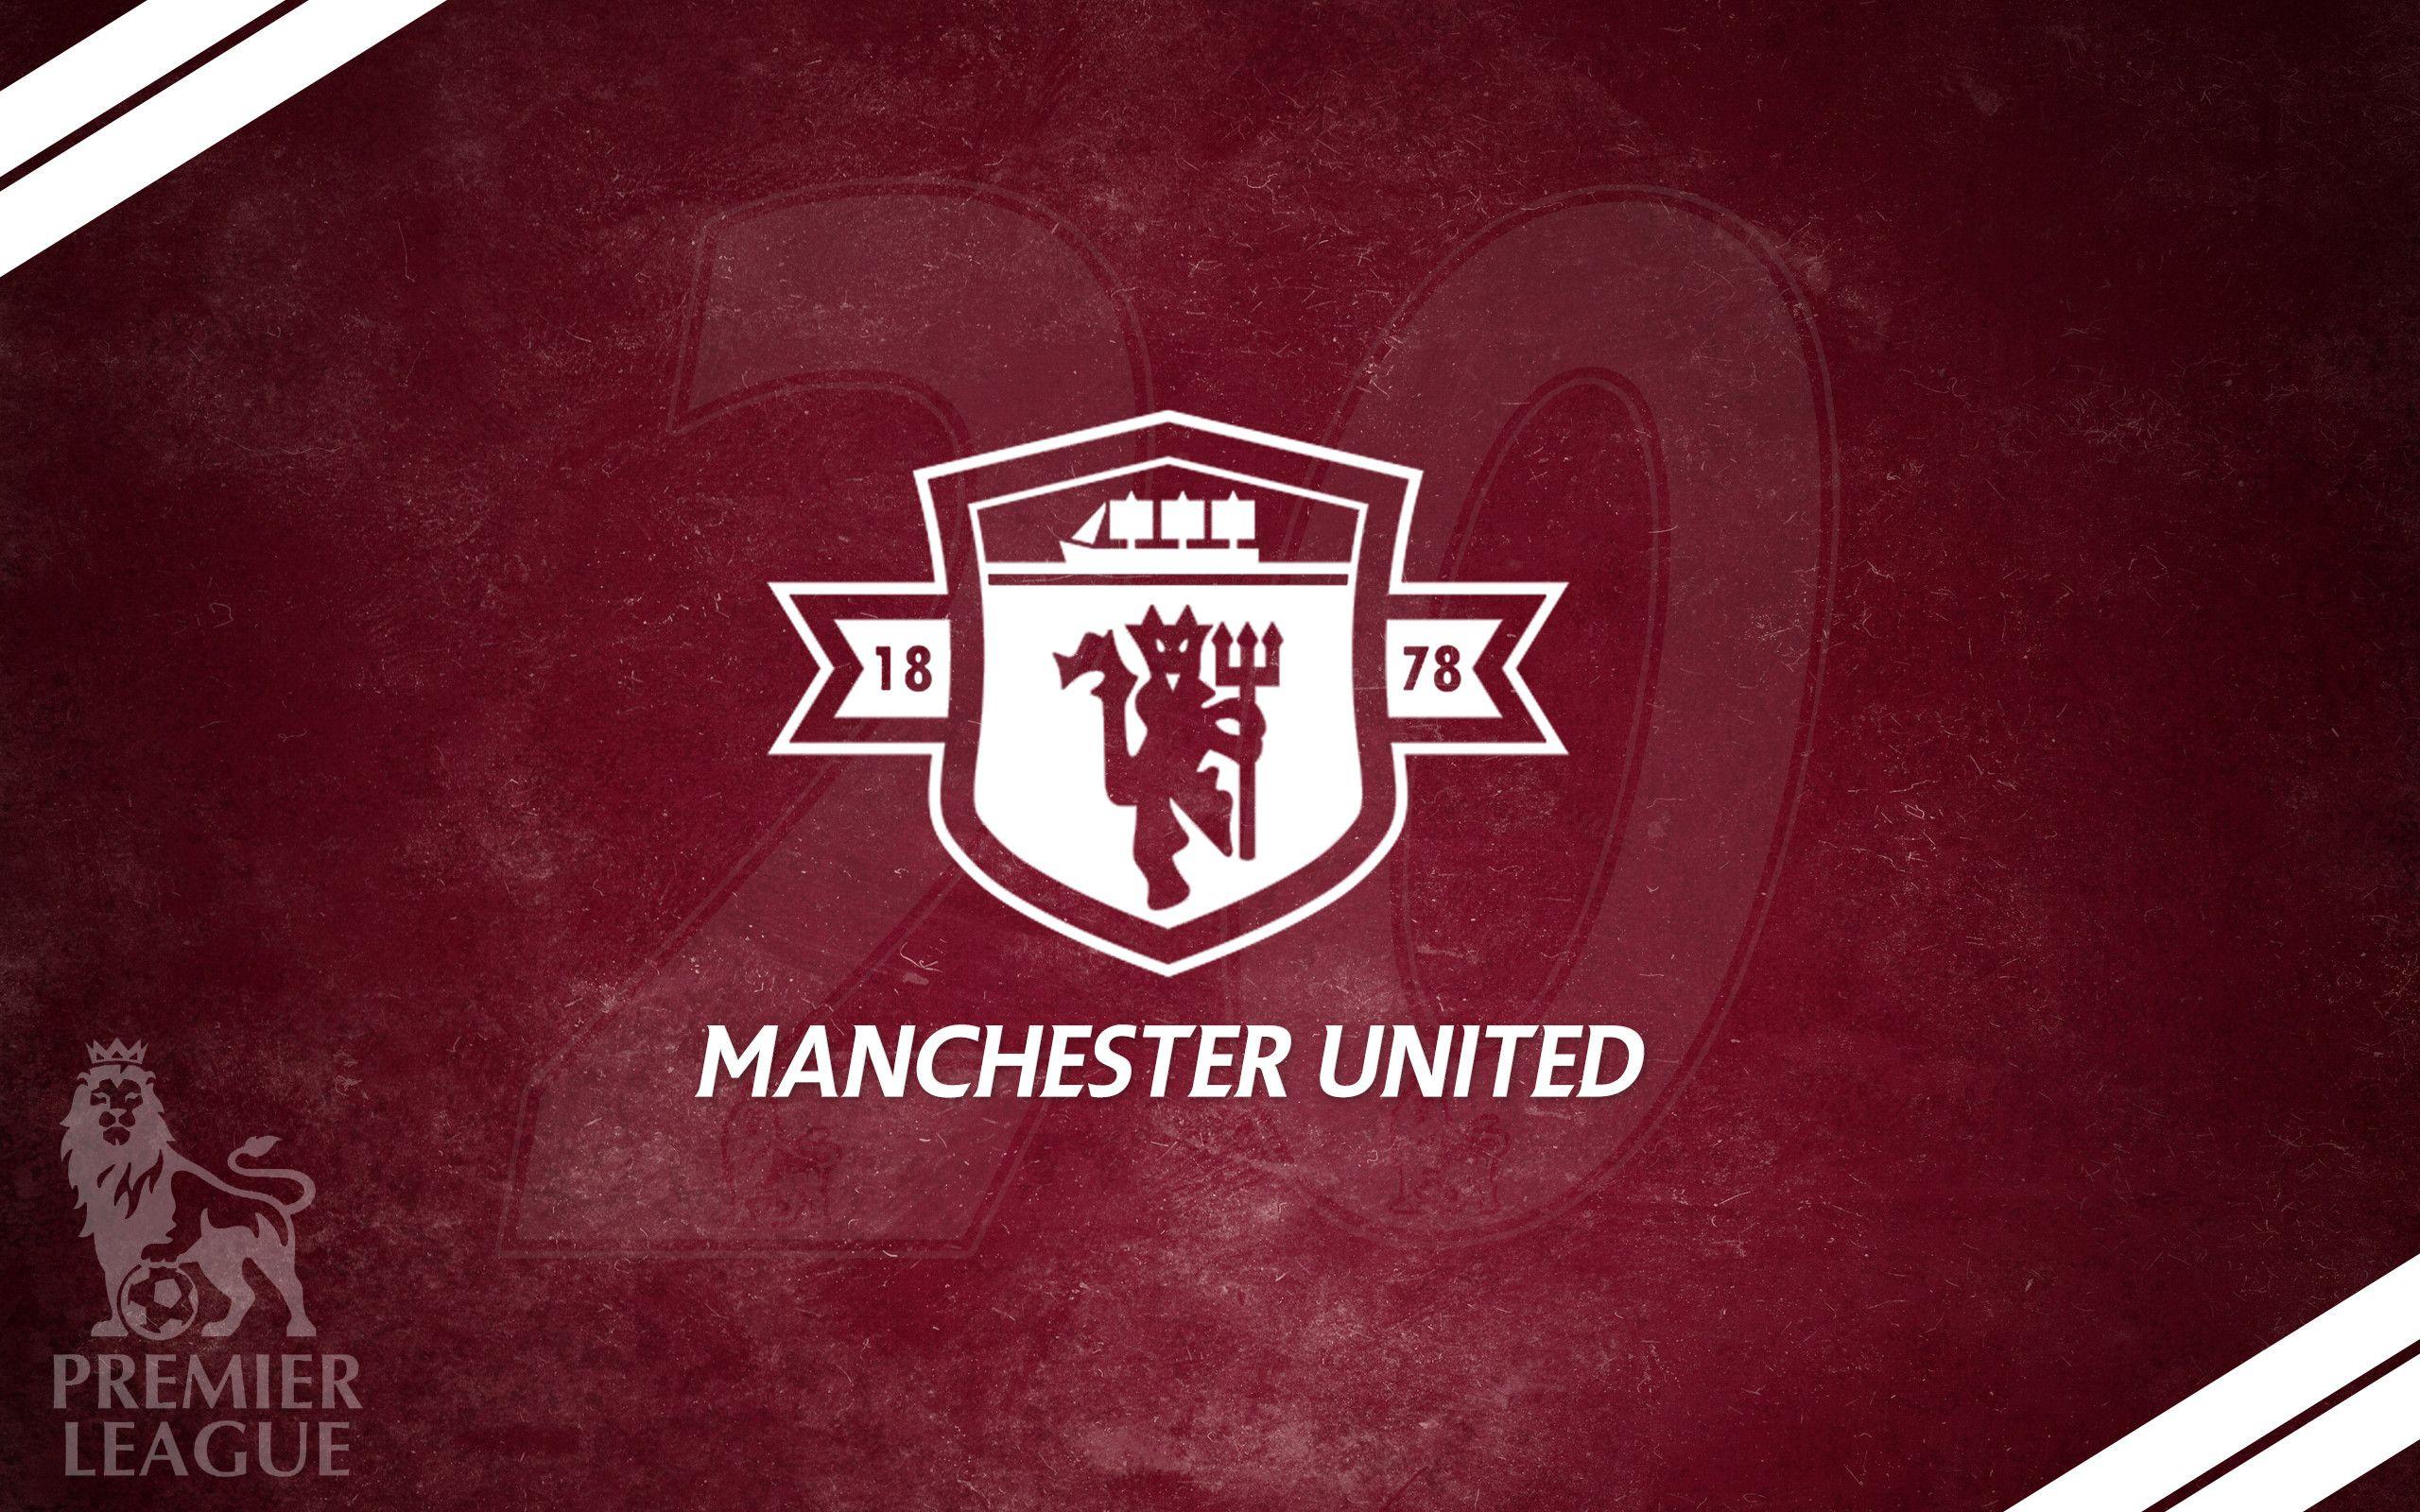 Reddevils, Thought you all might like this wallpaper